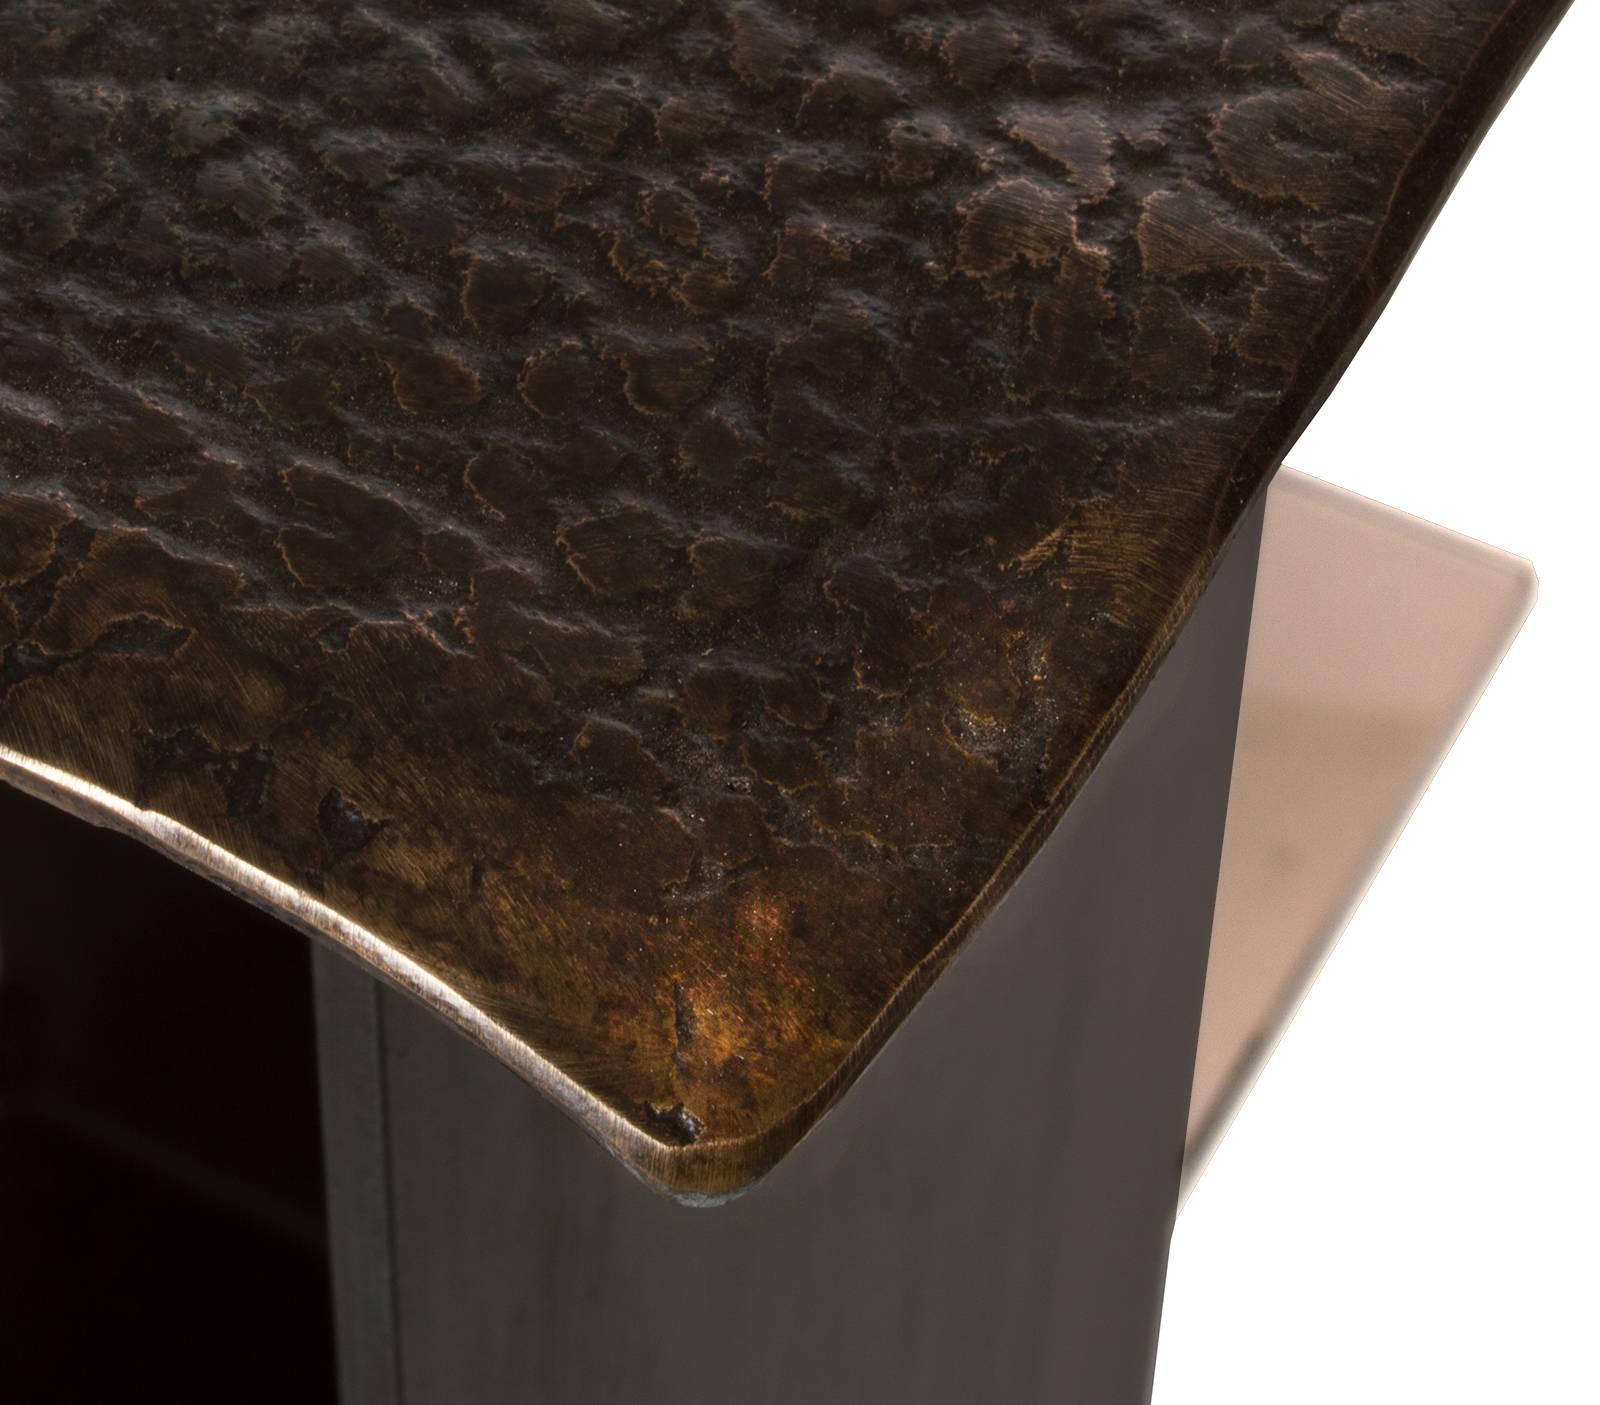 Domito end table contemporary cast bronze leather texture steel with glass shelf

The Domito end table has a cast bronze top produced from a real leather mold. We finish and patina the bronze to bring out the texture. The final bronze top looks